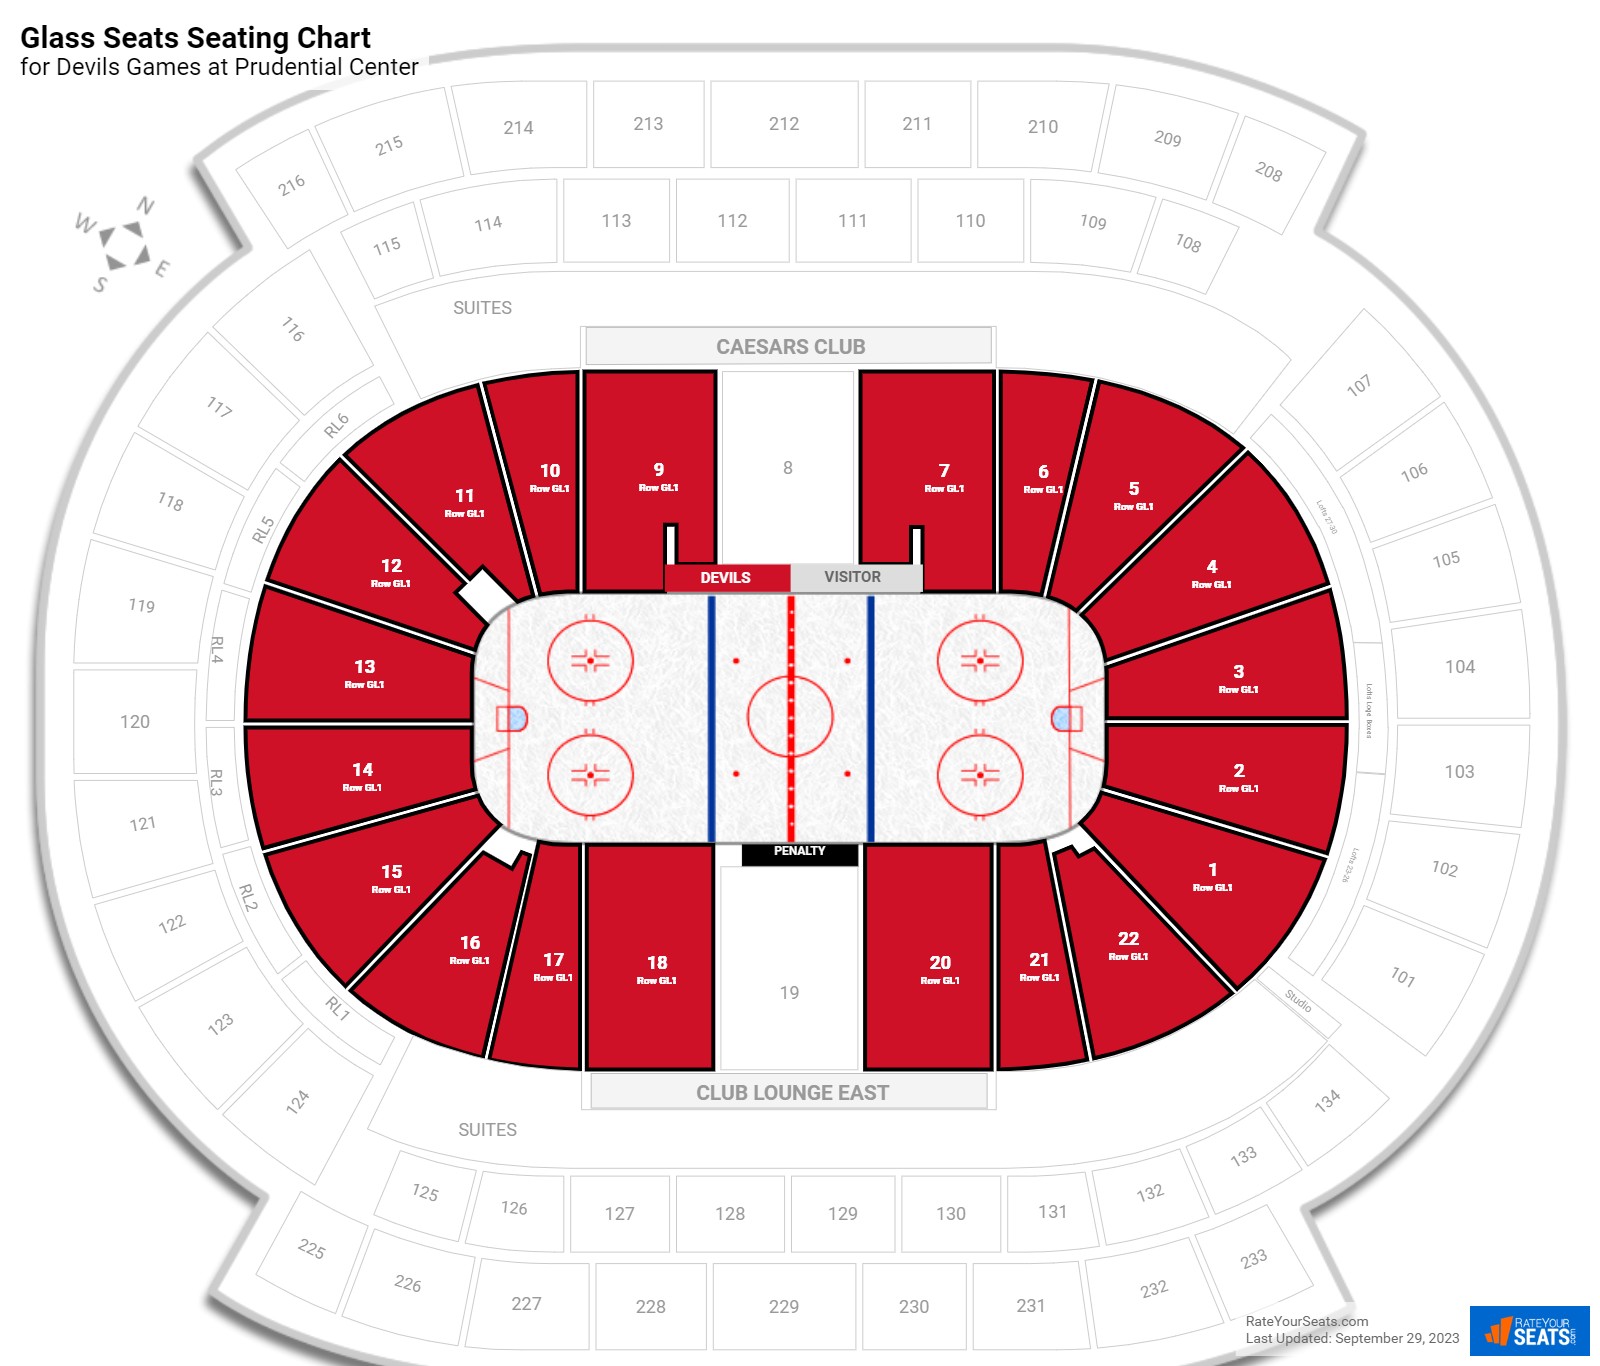 Devils Glass Seats Seating Chart at Prudential Center